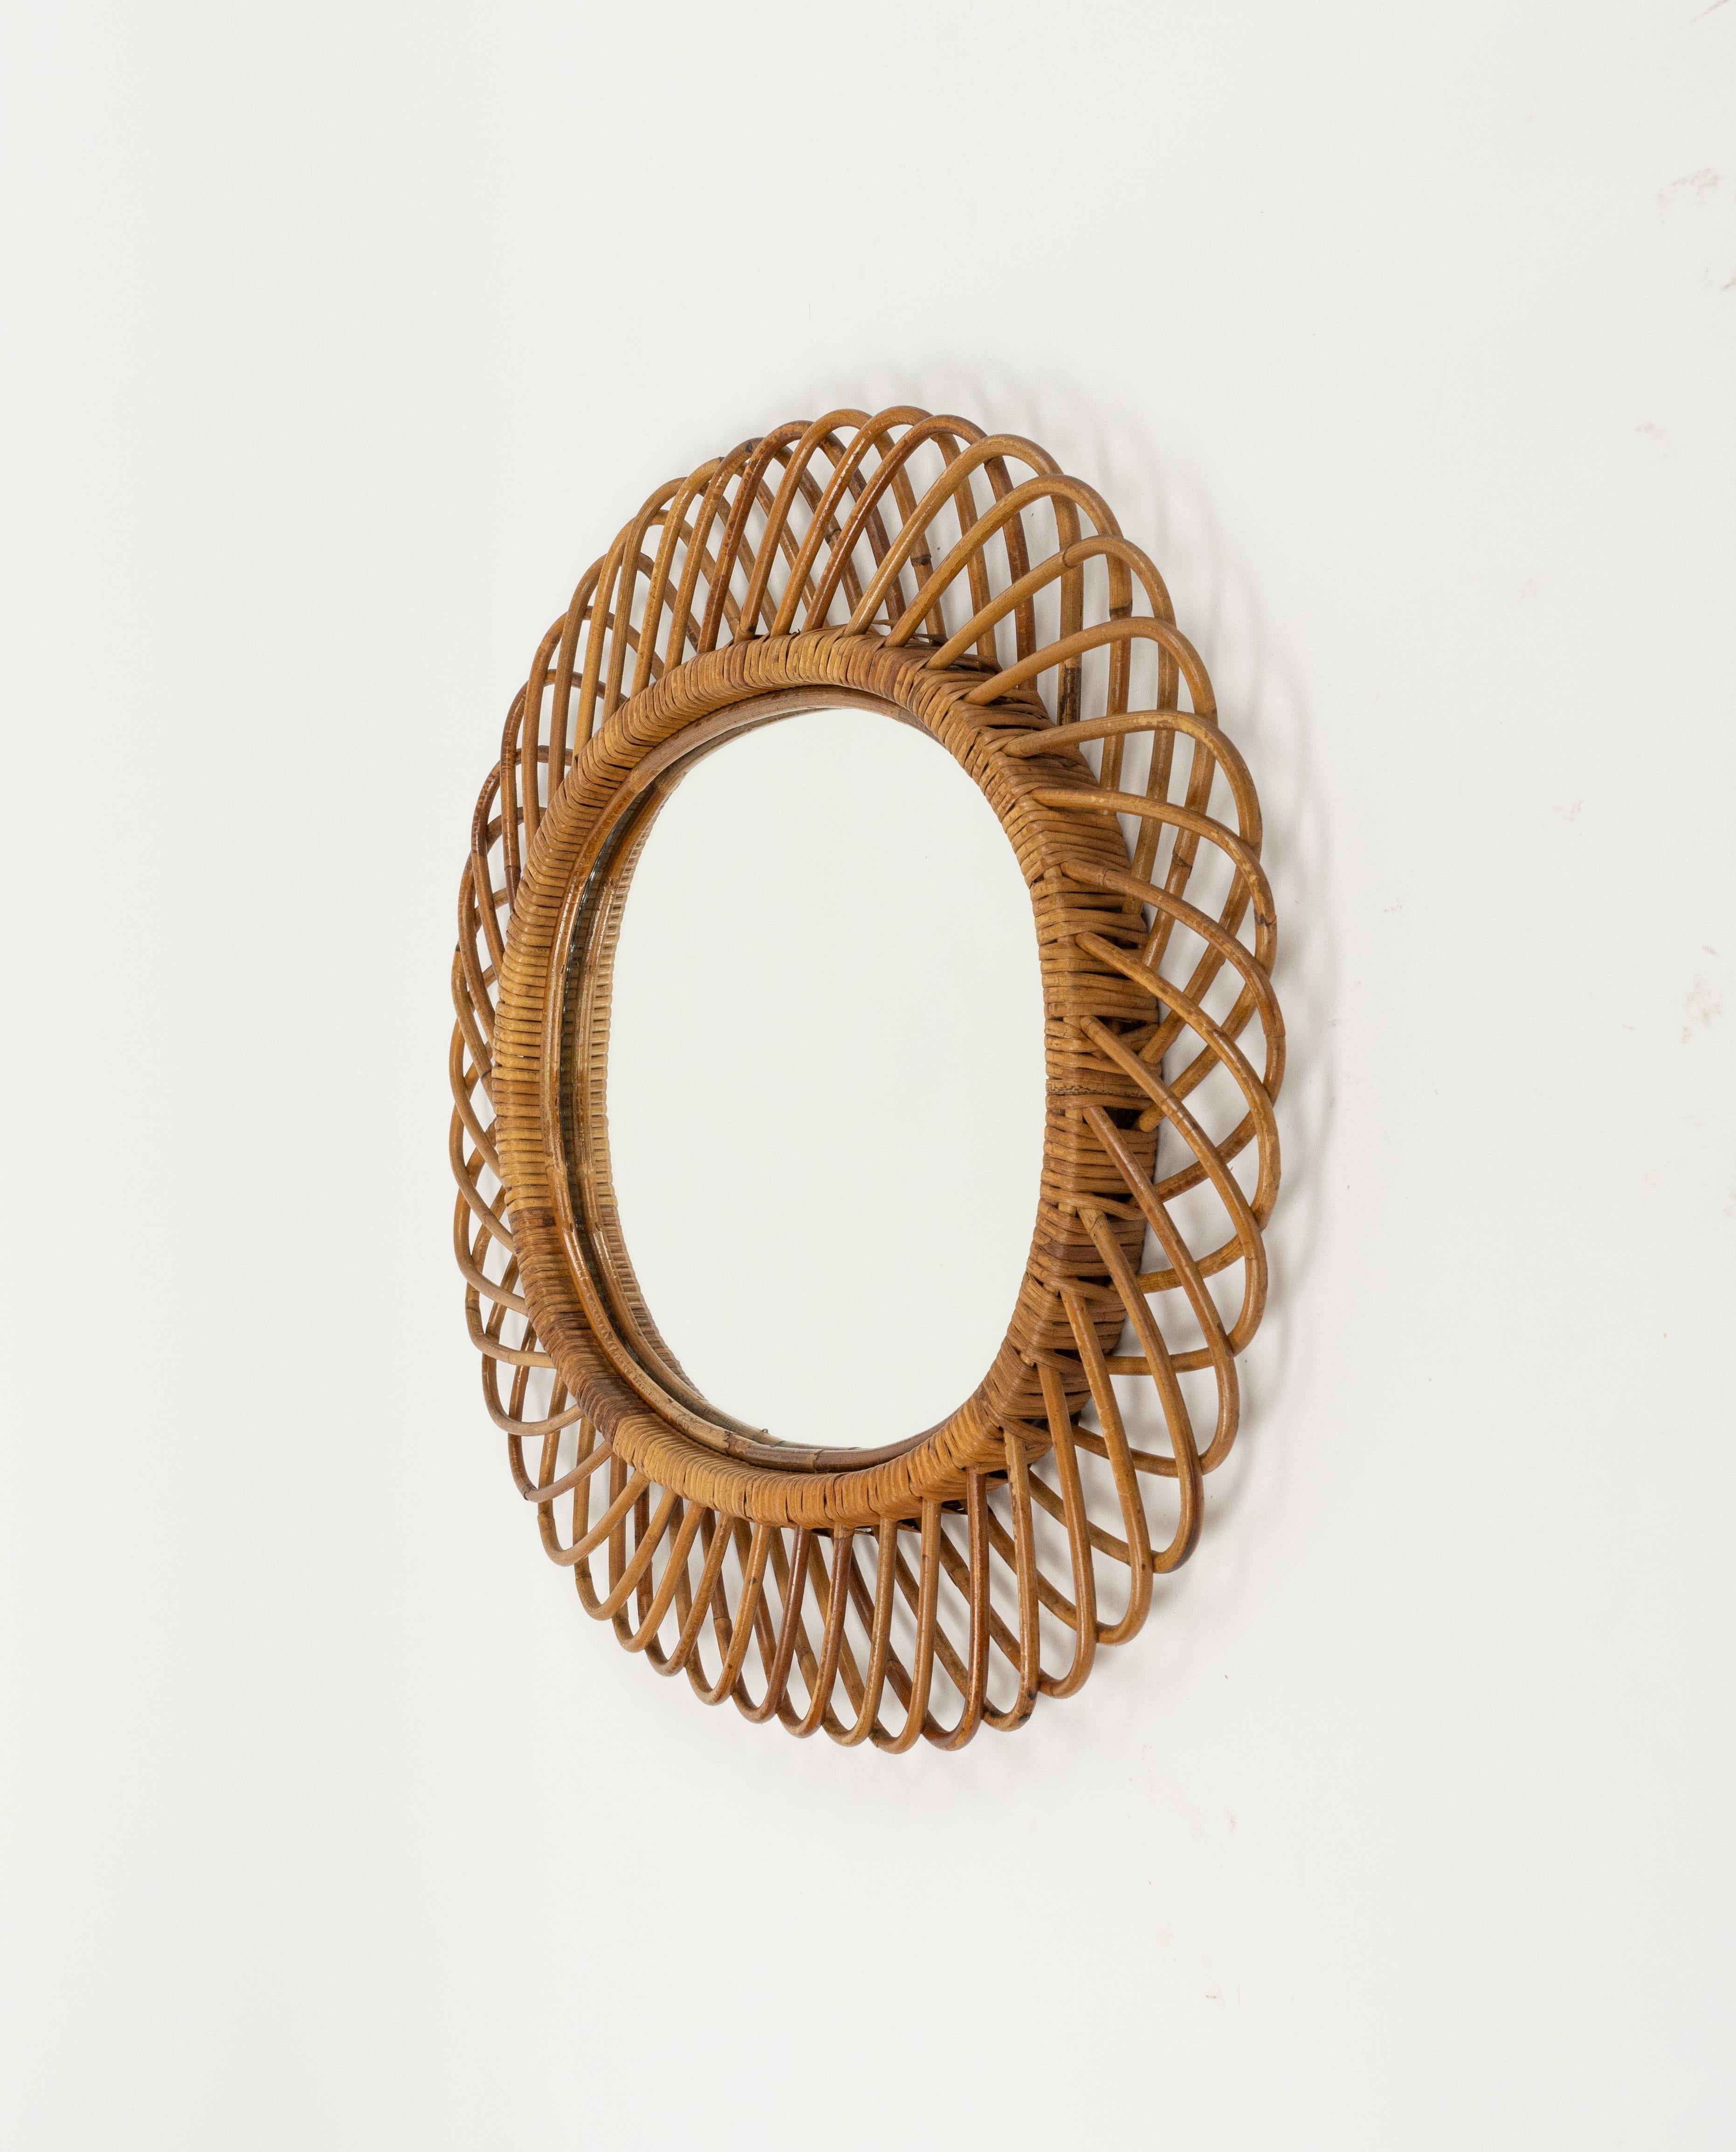 Midcentury Rattan and Bamboo Oval Wall Mirror by Franco Albini, Italy 1960s For Sale 5